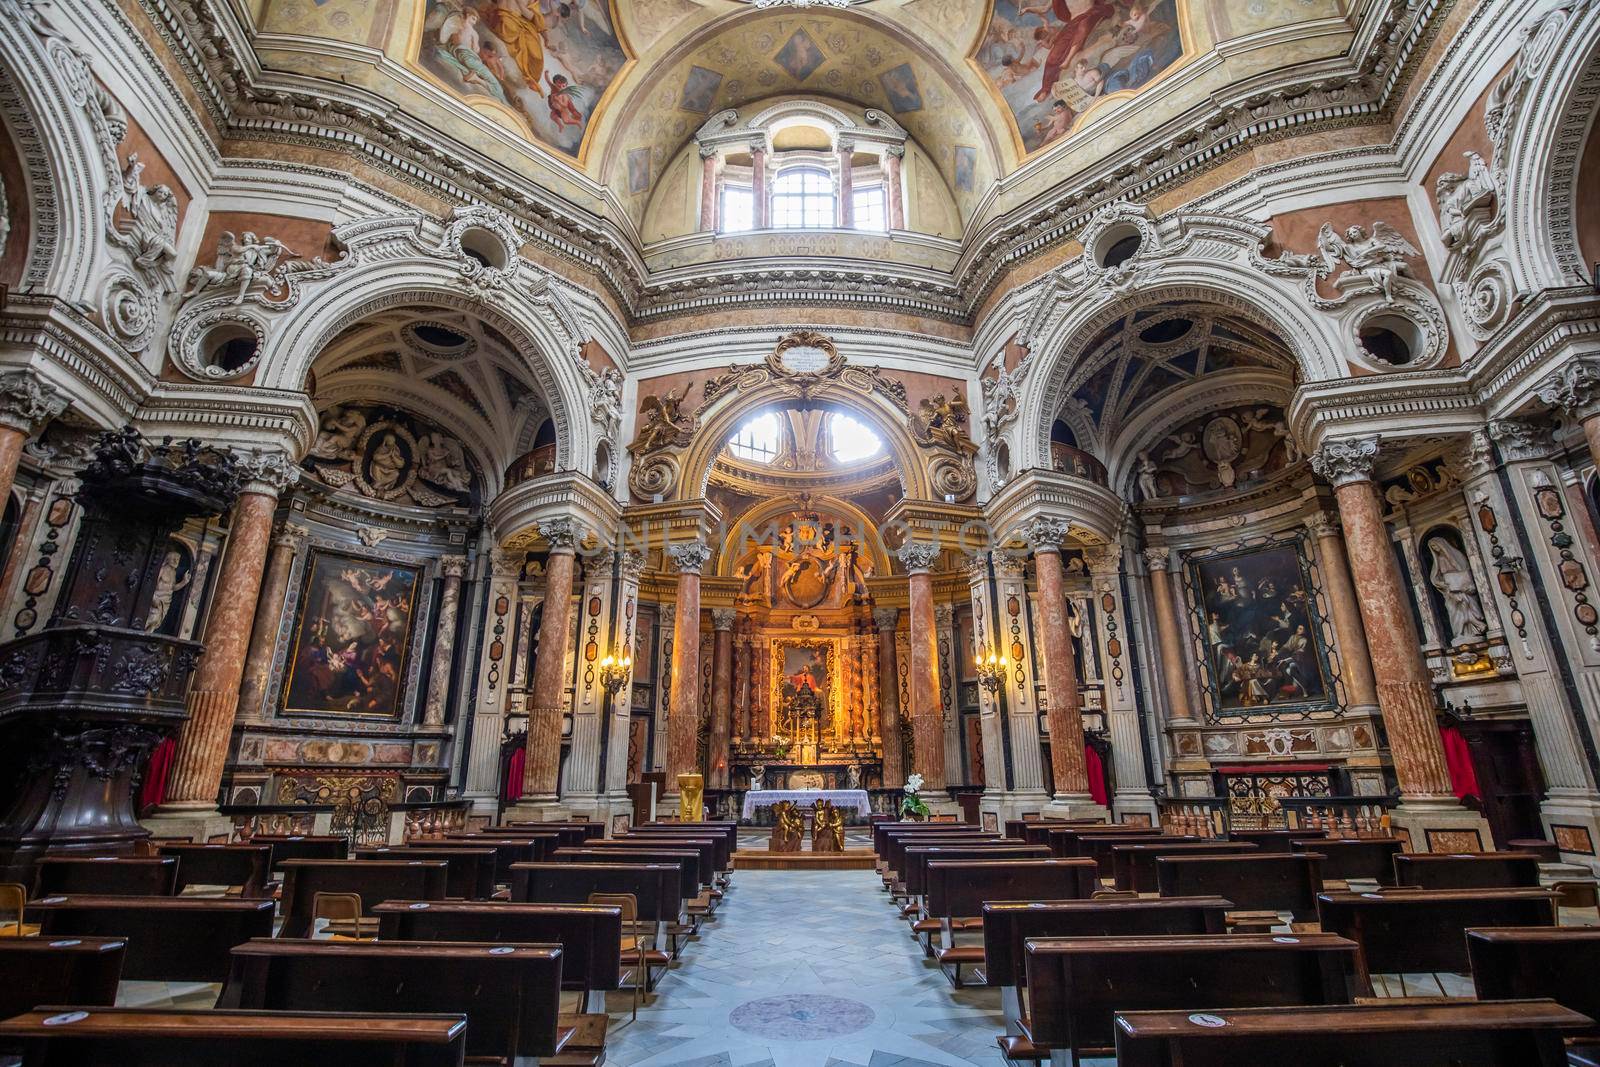 Antique baroque interior with vintage decoration. Royal Church of San Lorenzo (St. Lawrence) in Turin, Italy by Perseomedusa